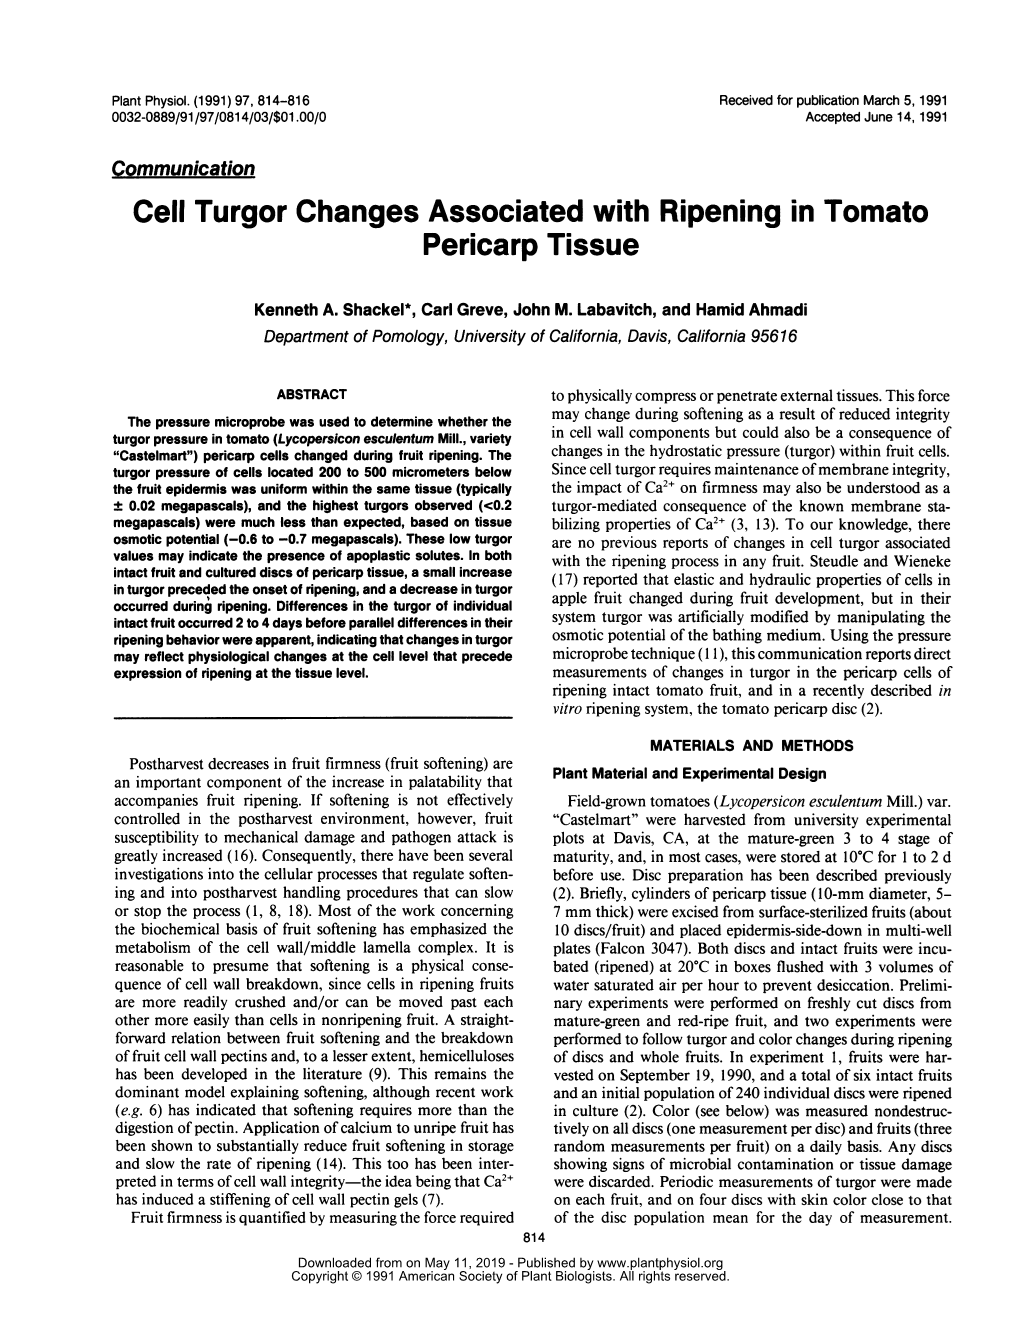 Cell Turgor Changes Associatedwith Ripening in Tomato Pericarp Tissue